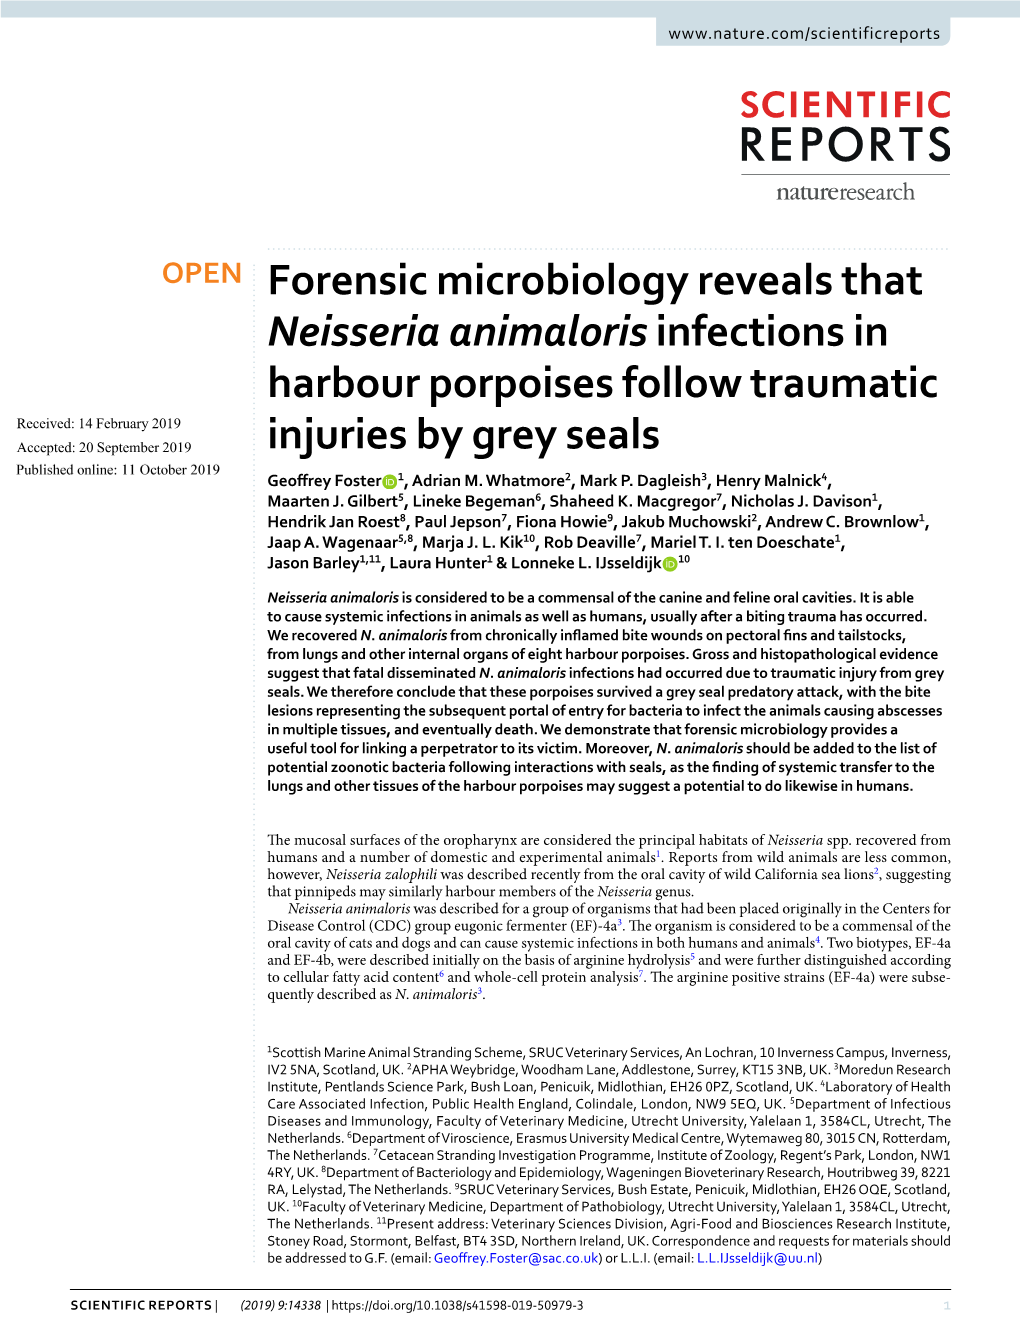 Forensic Microbiology Reveals That Neisseria Animaloris Infections In